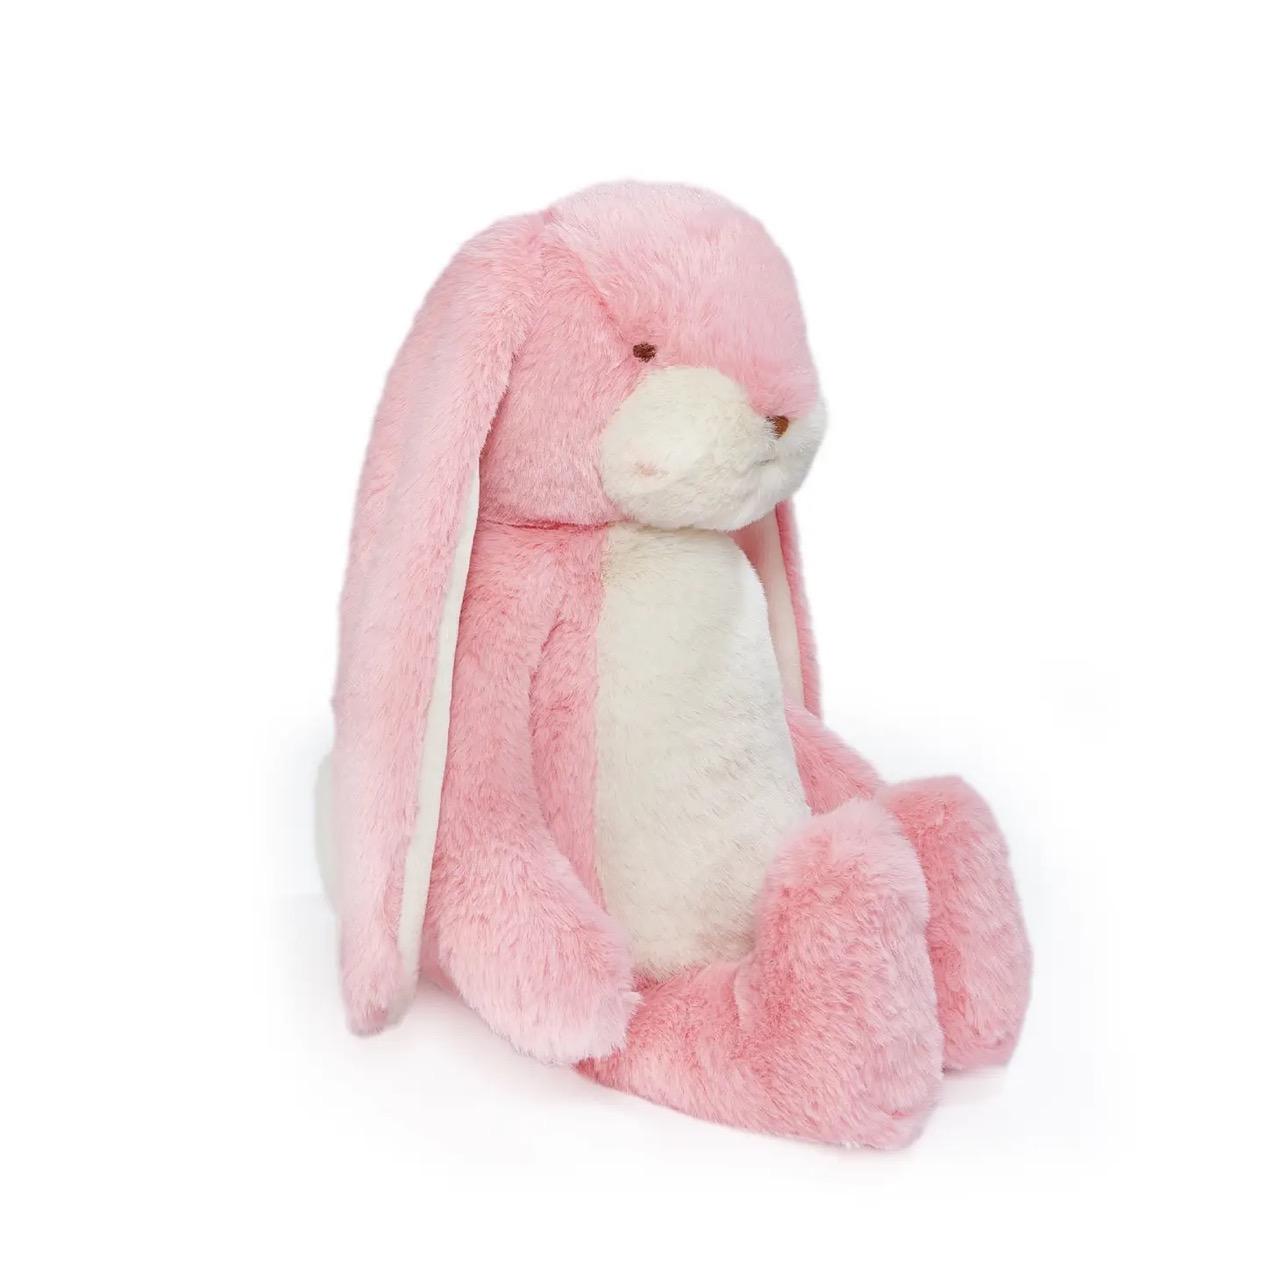 Pink bunny 3 Large